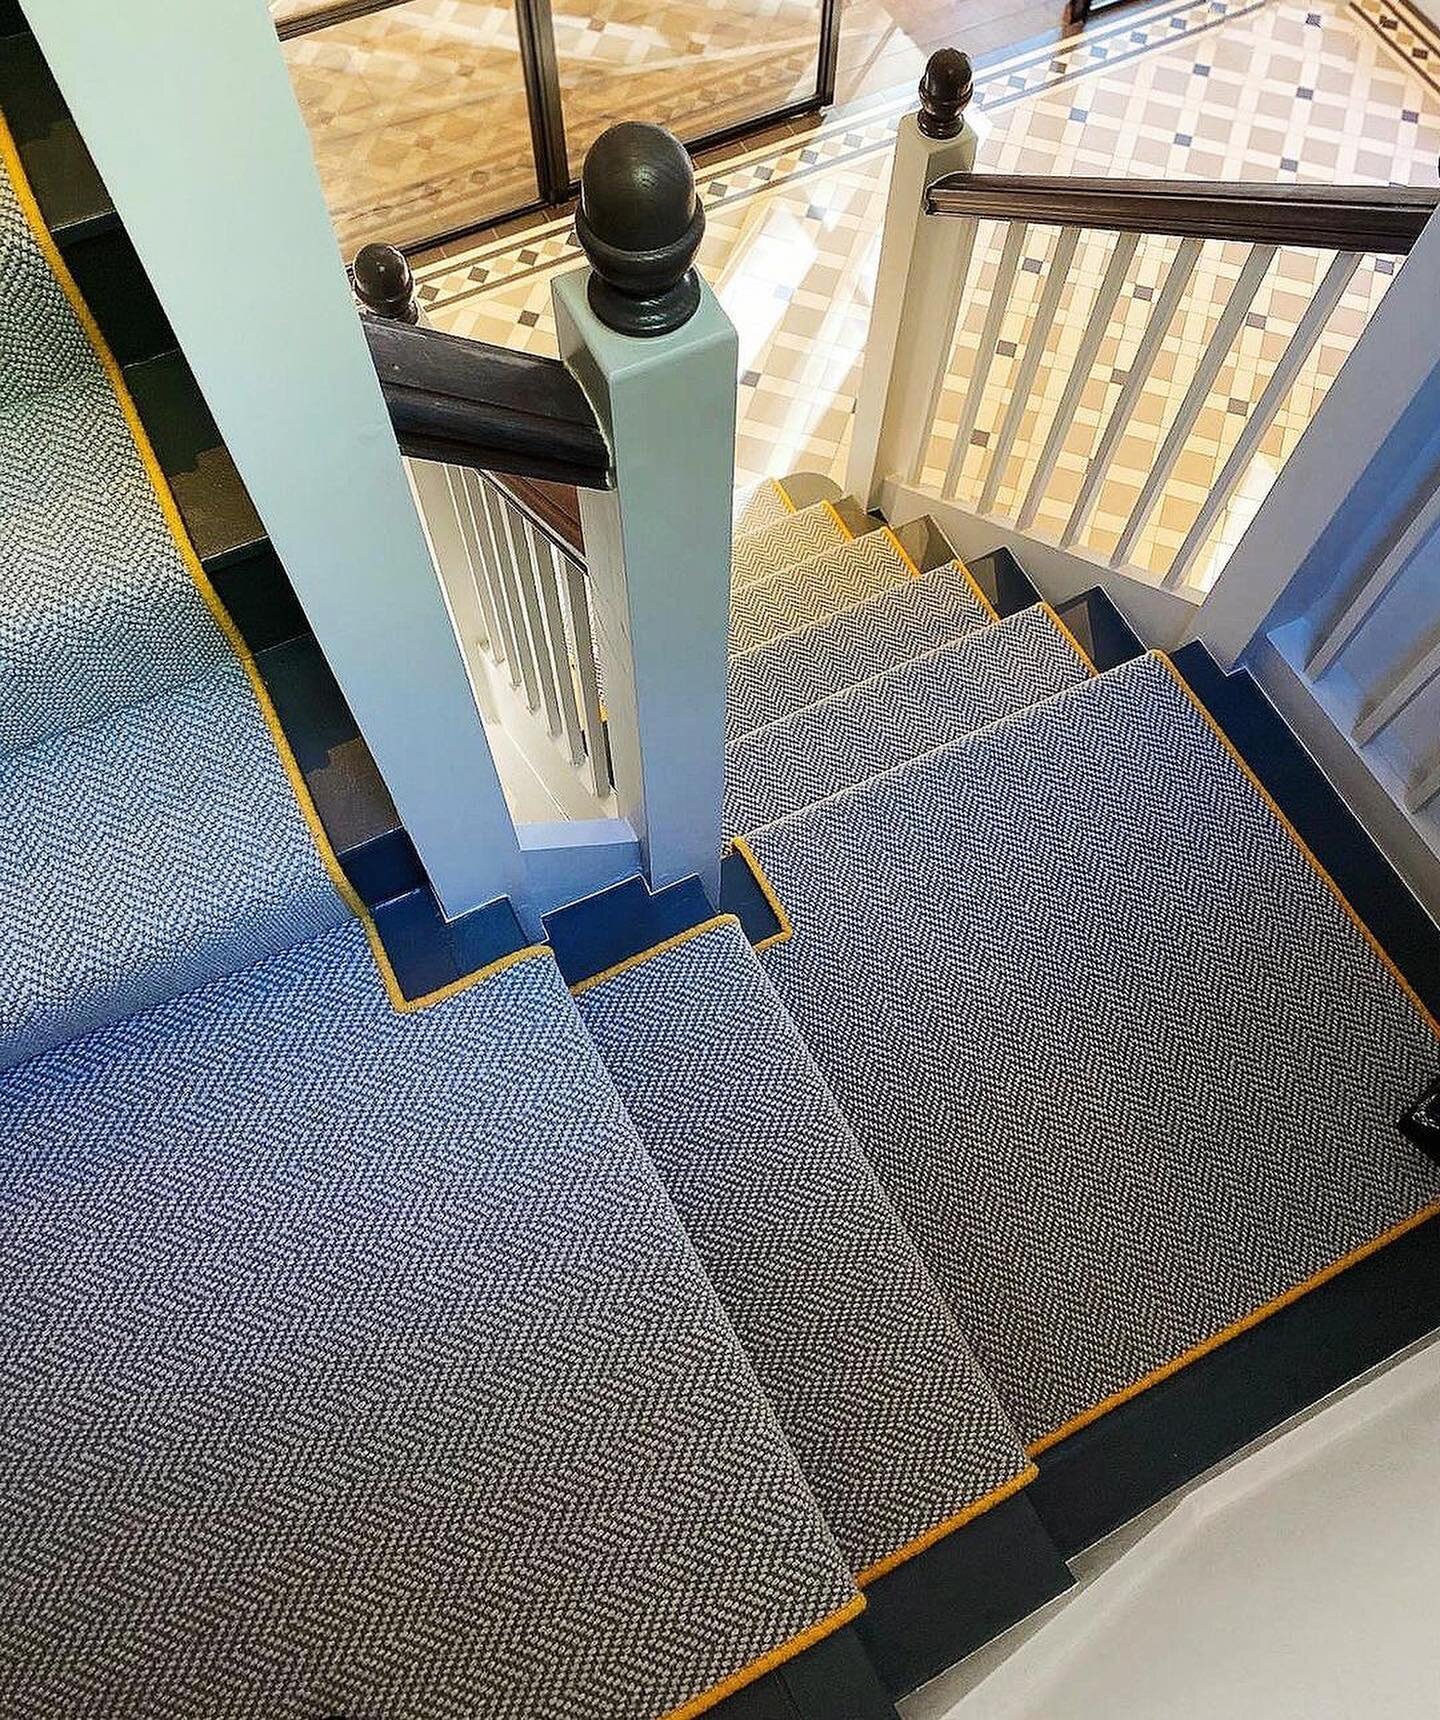 Decorating with a stair runner means that you can add colour and texture to your interior while allowing the sophistication of your dark-hued stairway to shine through.⁣⁣⁣⁣
⁣⁣⁣
We love how our client created a feature of their staircase with a bespok